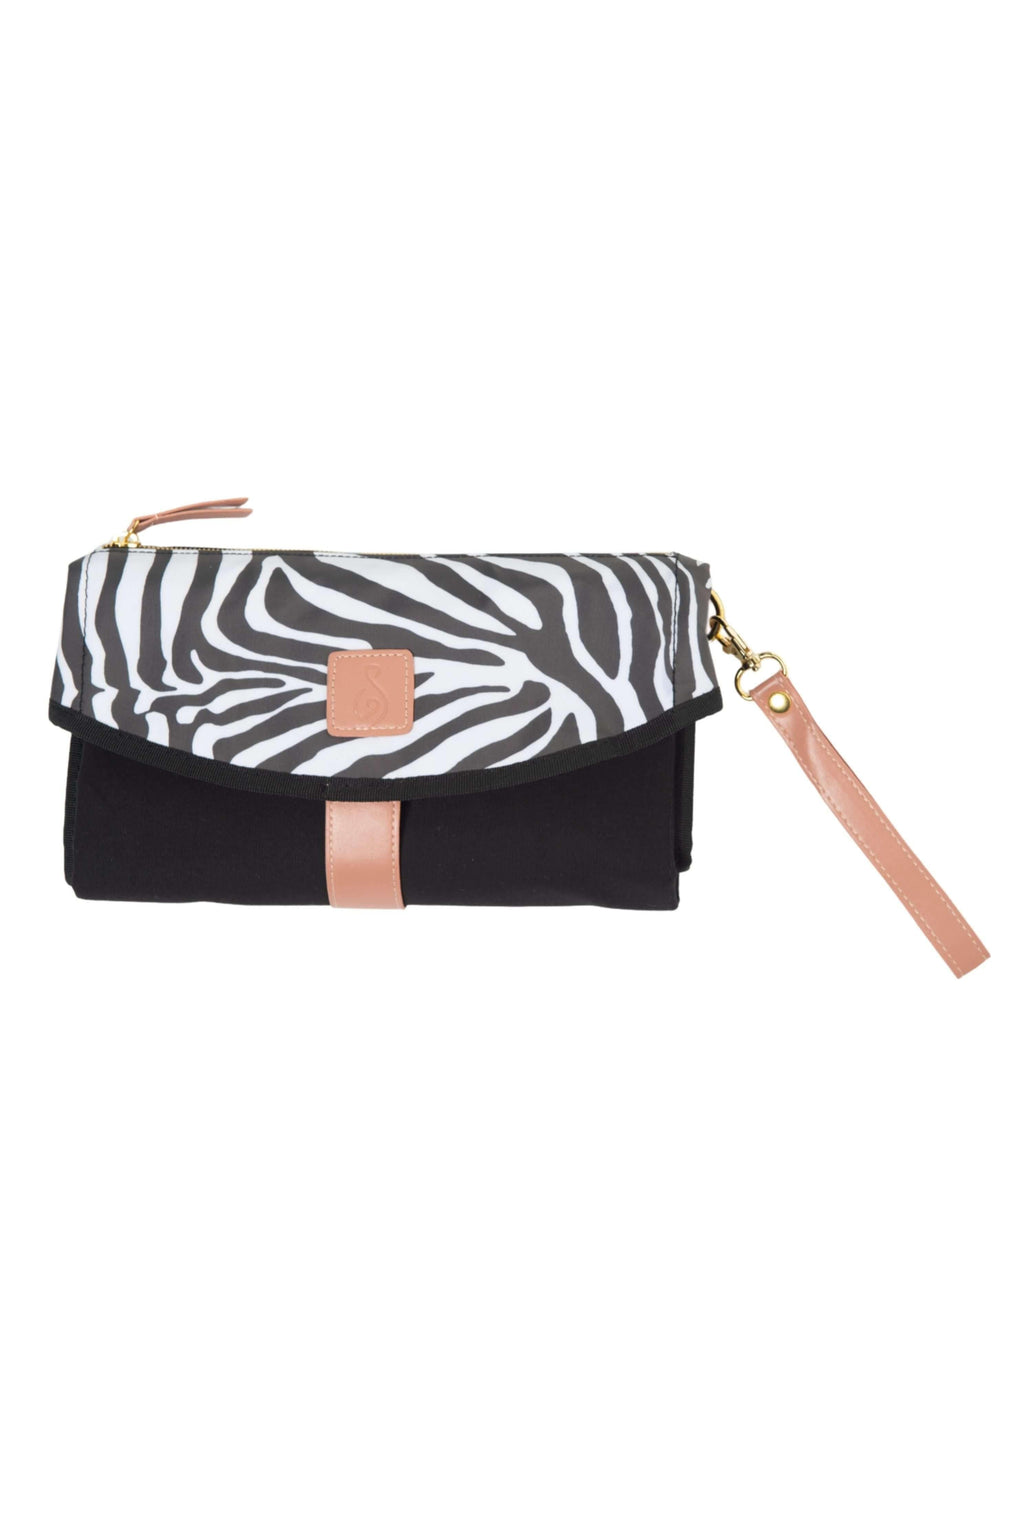 The All Rounder Change Mat shown laying folded up with sand coloured wrist strap. Black rectangular clutch with zebra print curved closing and sand coloured square badge, wrist strap and zip handle.